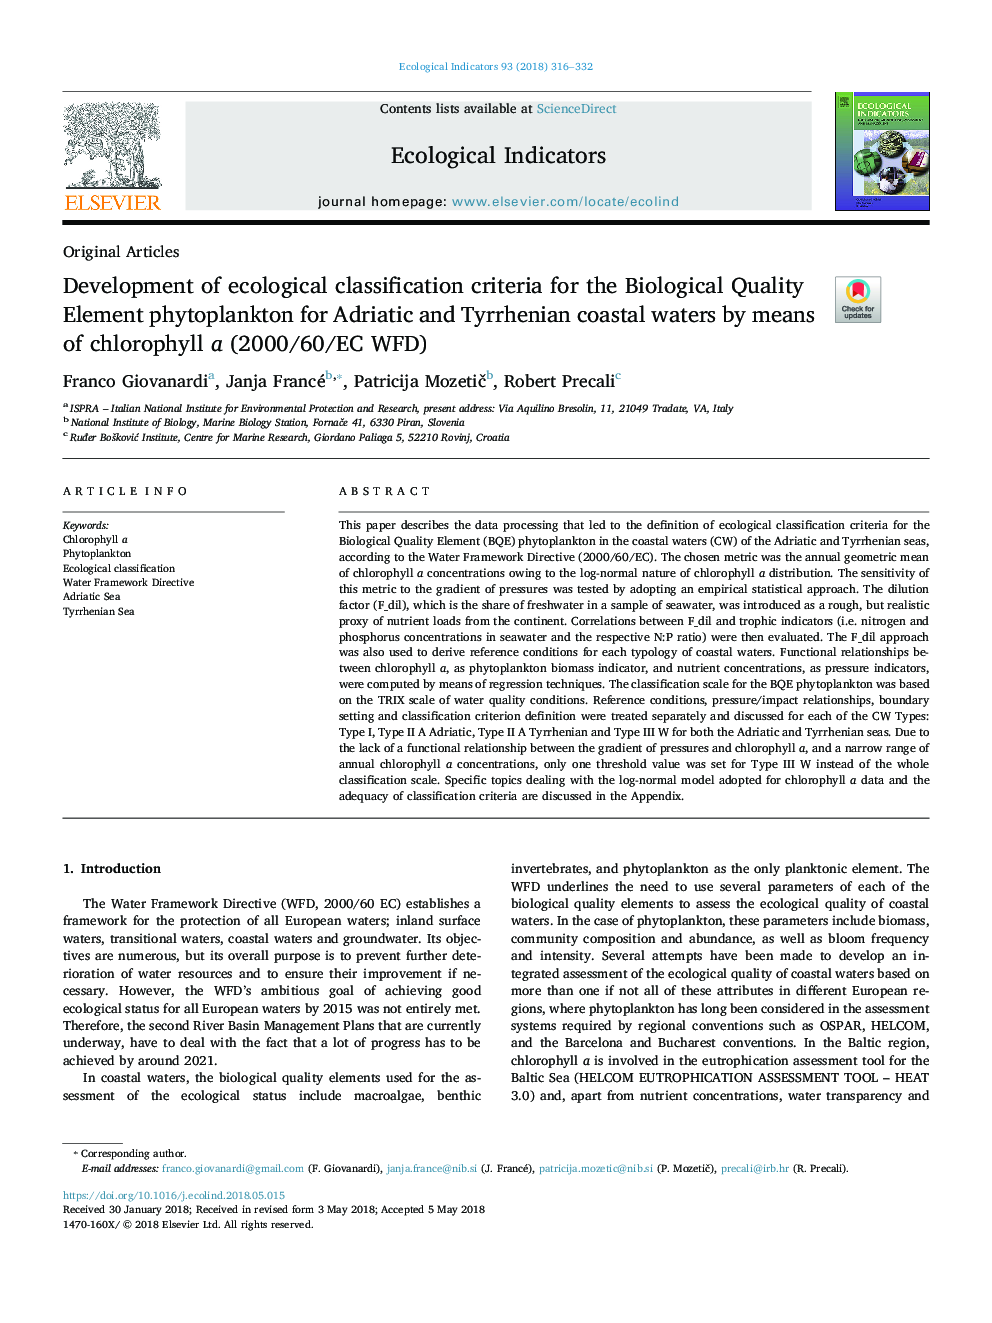 Development of ecological classification criteria for the Biological Quality Element phytoplankton for Adriatic and Tyrrhenian coastal waters by means of chlorophyll a (2000/60/EC WFD)